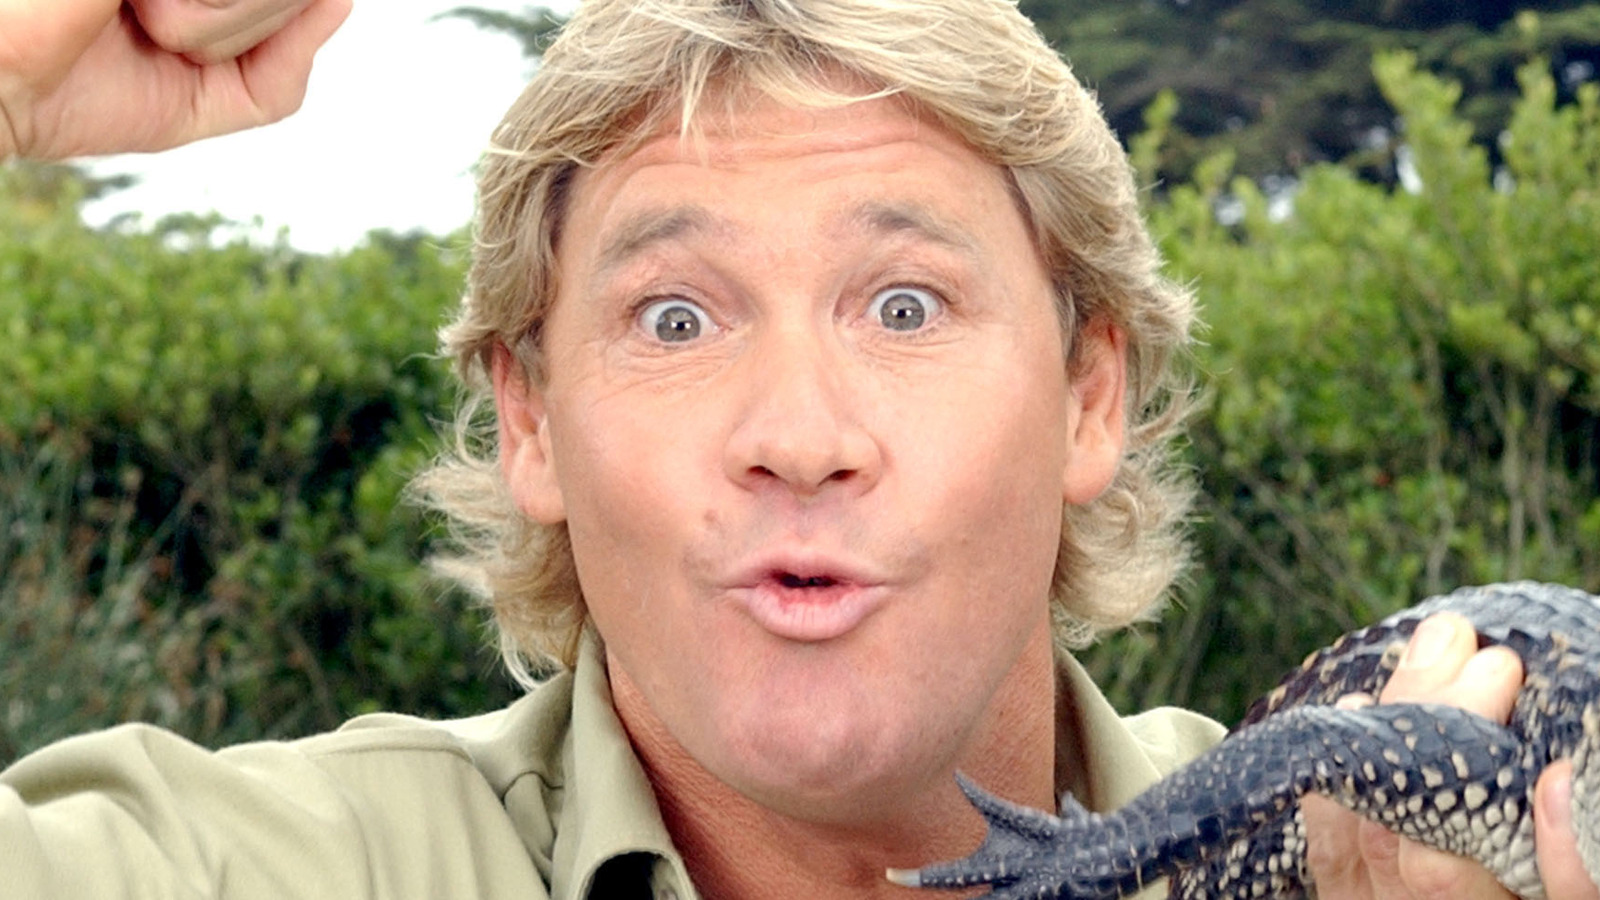 Little Known Facts About Steve Irwin The Crocodile Hunter